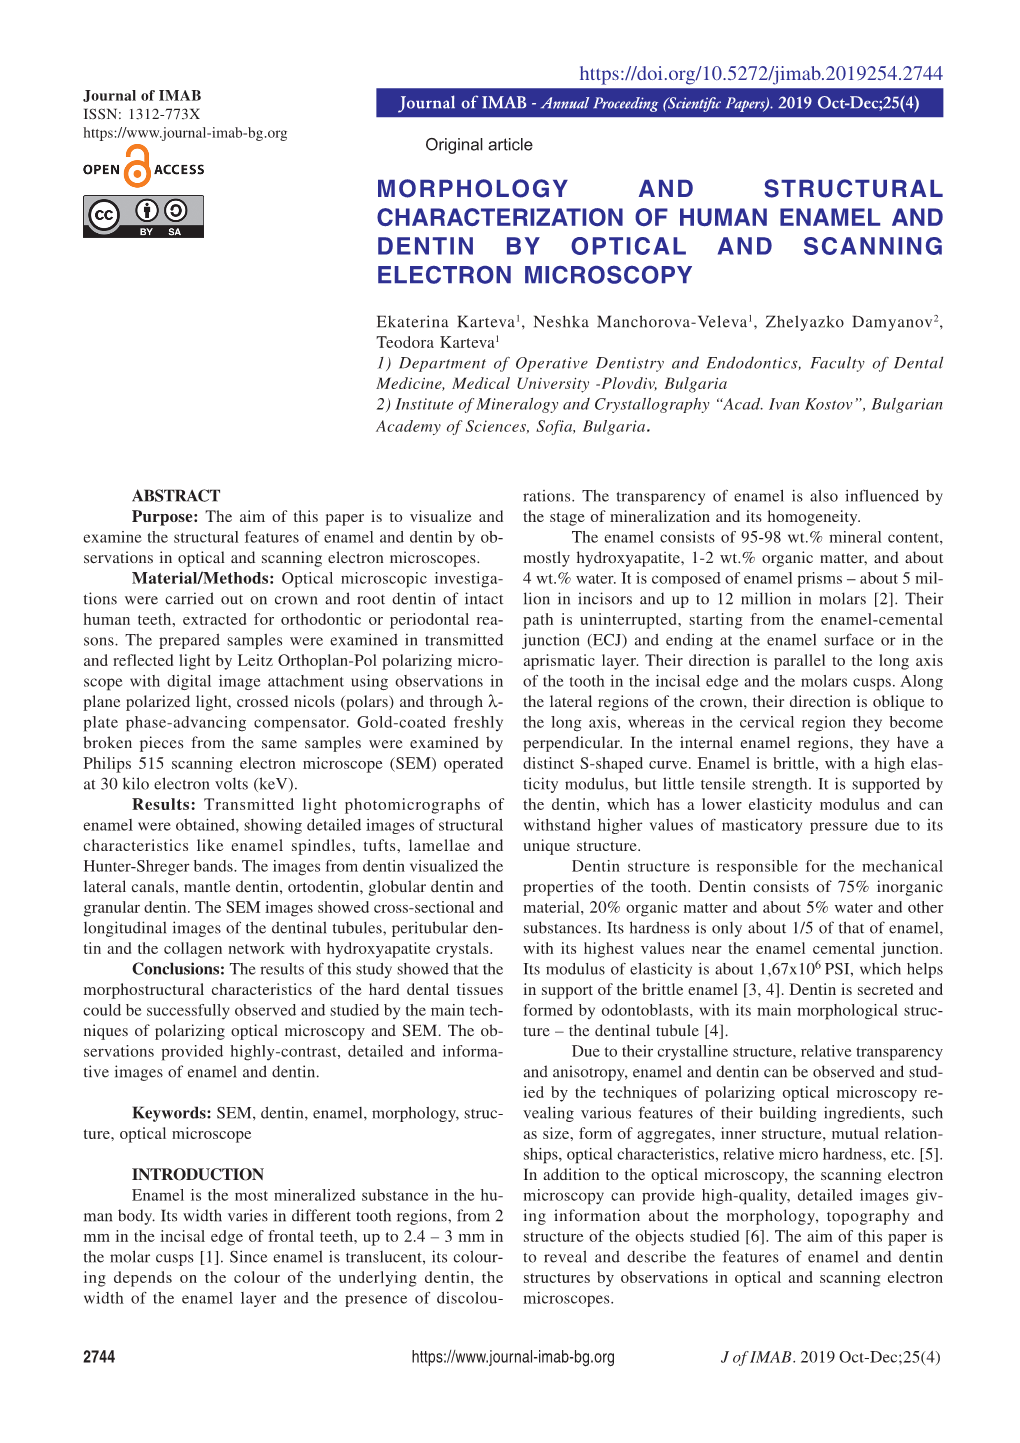 Morphology and Structural Characterization of Human Enamel and Dentin by Optical and Scanning Electron Microscopy